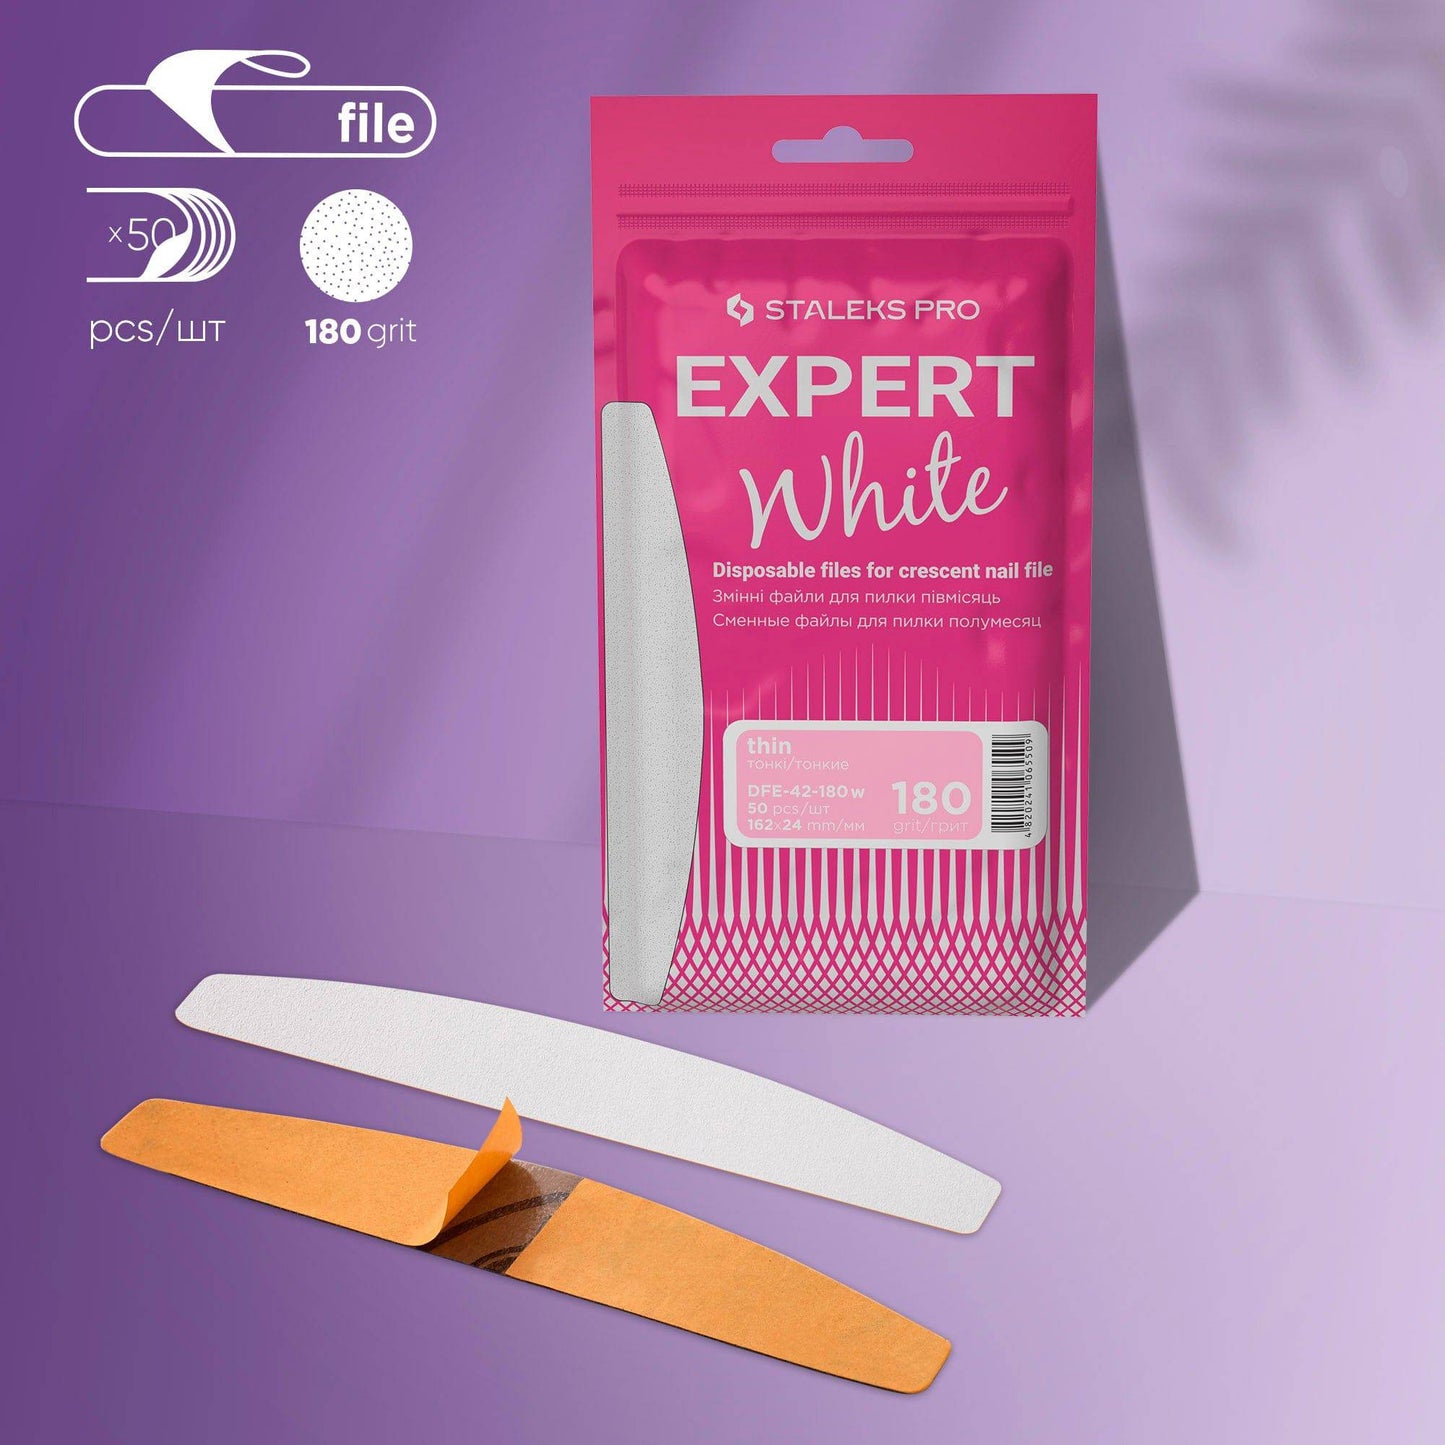 Staleks White Disposable files for crescent nail file EXPERT 42 - F.O.X Nails USA